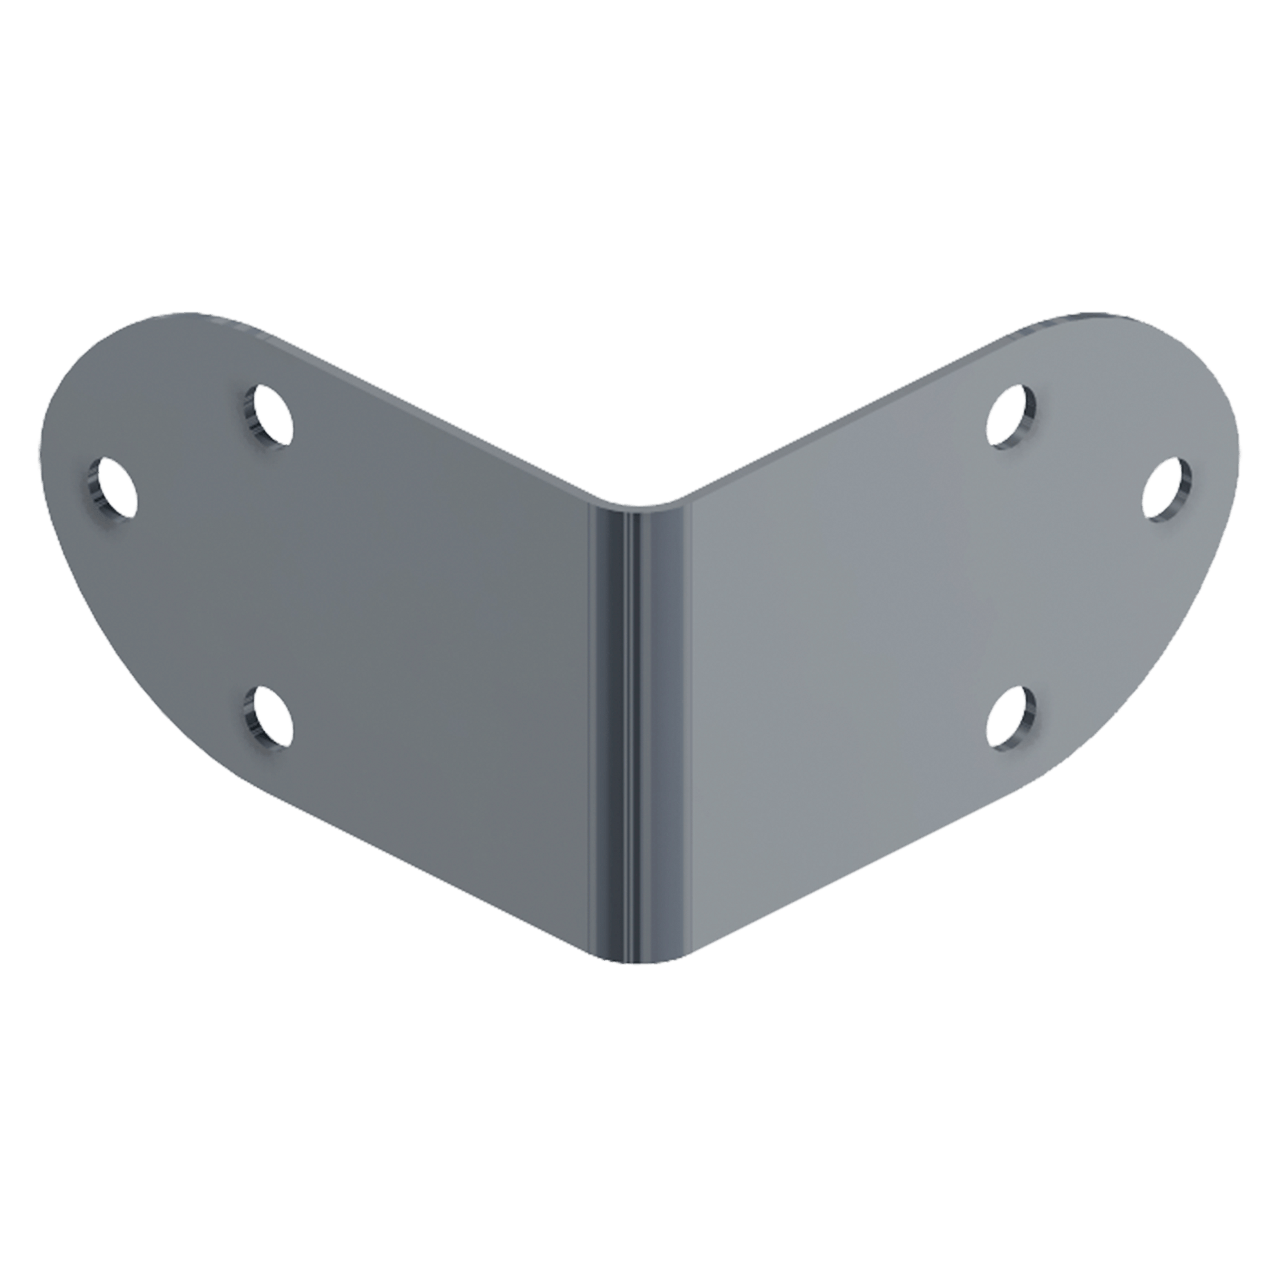 Six-Hole Clamp, 3/4 view